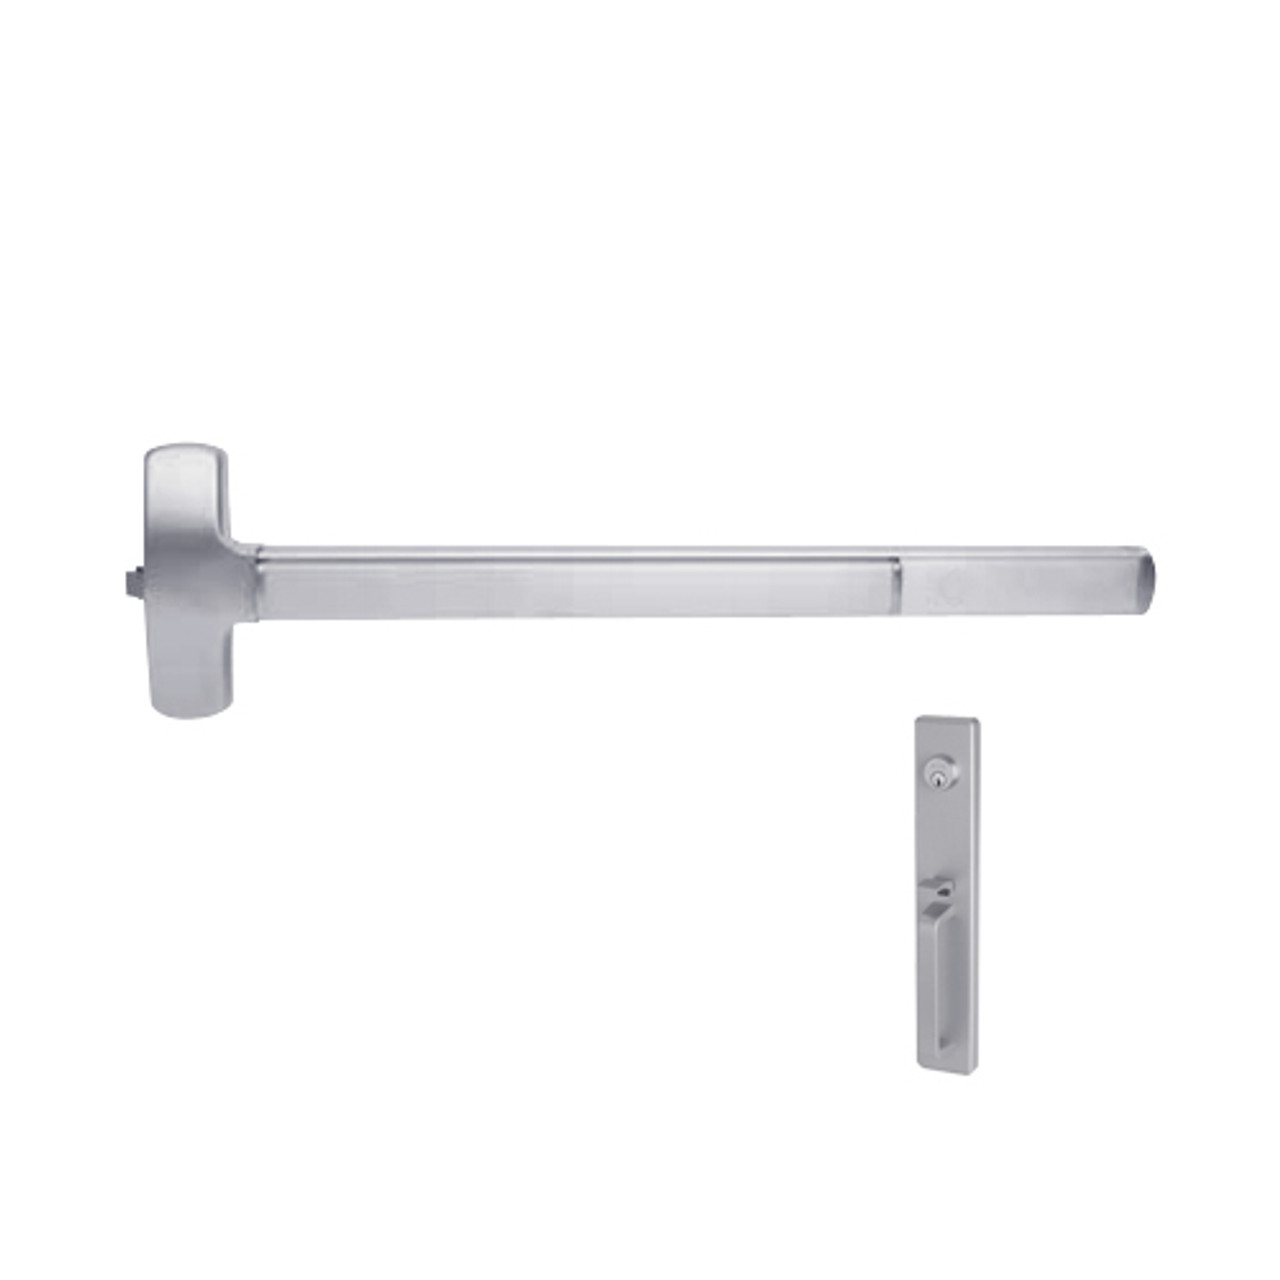 F-25-R-TP-BE-US32-3 Falcon Exit Device in Polished Stainless Steel